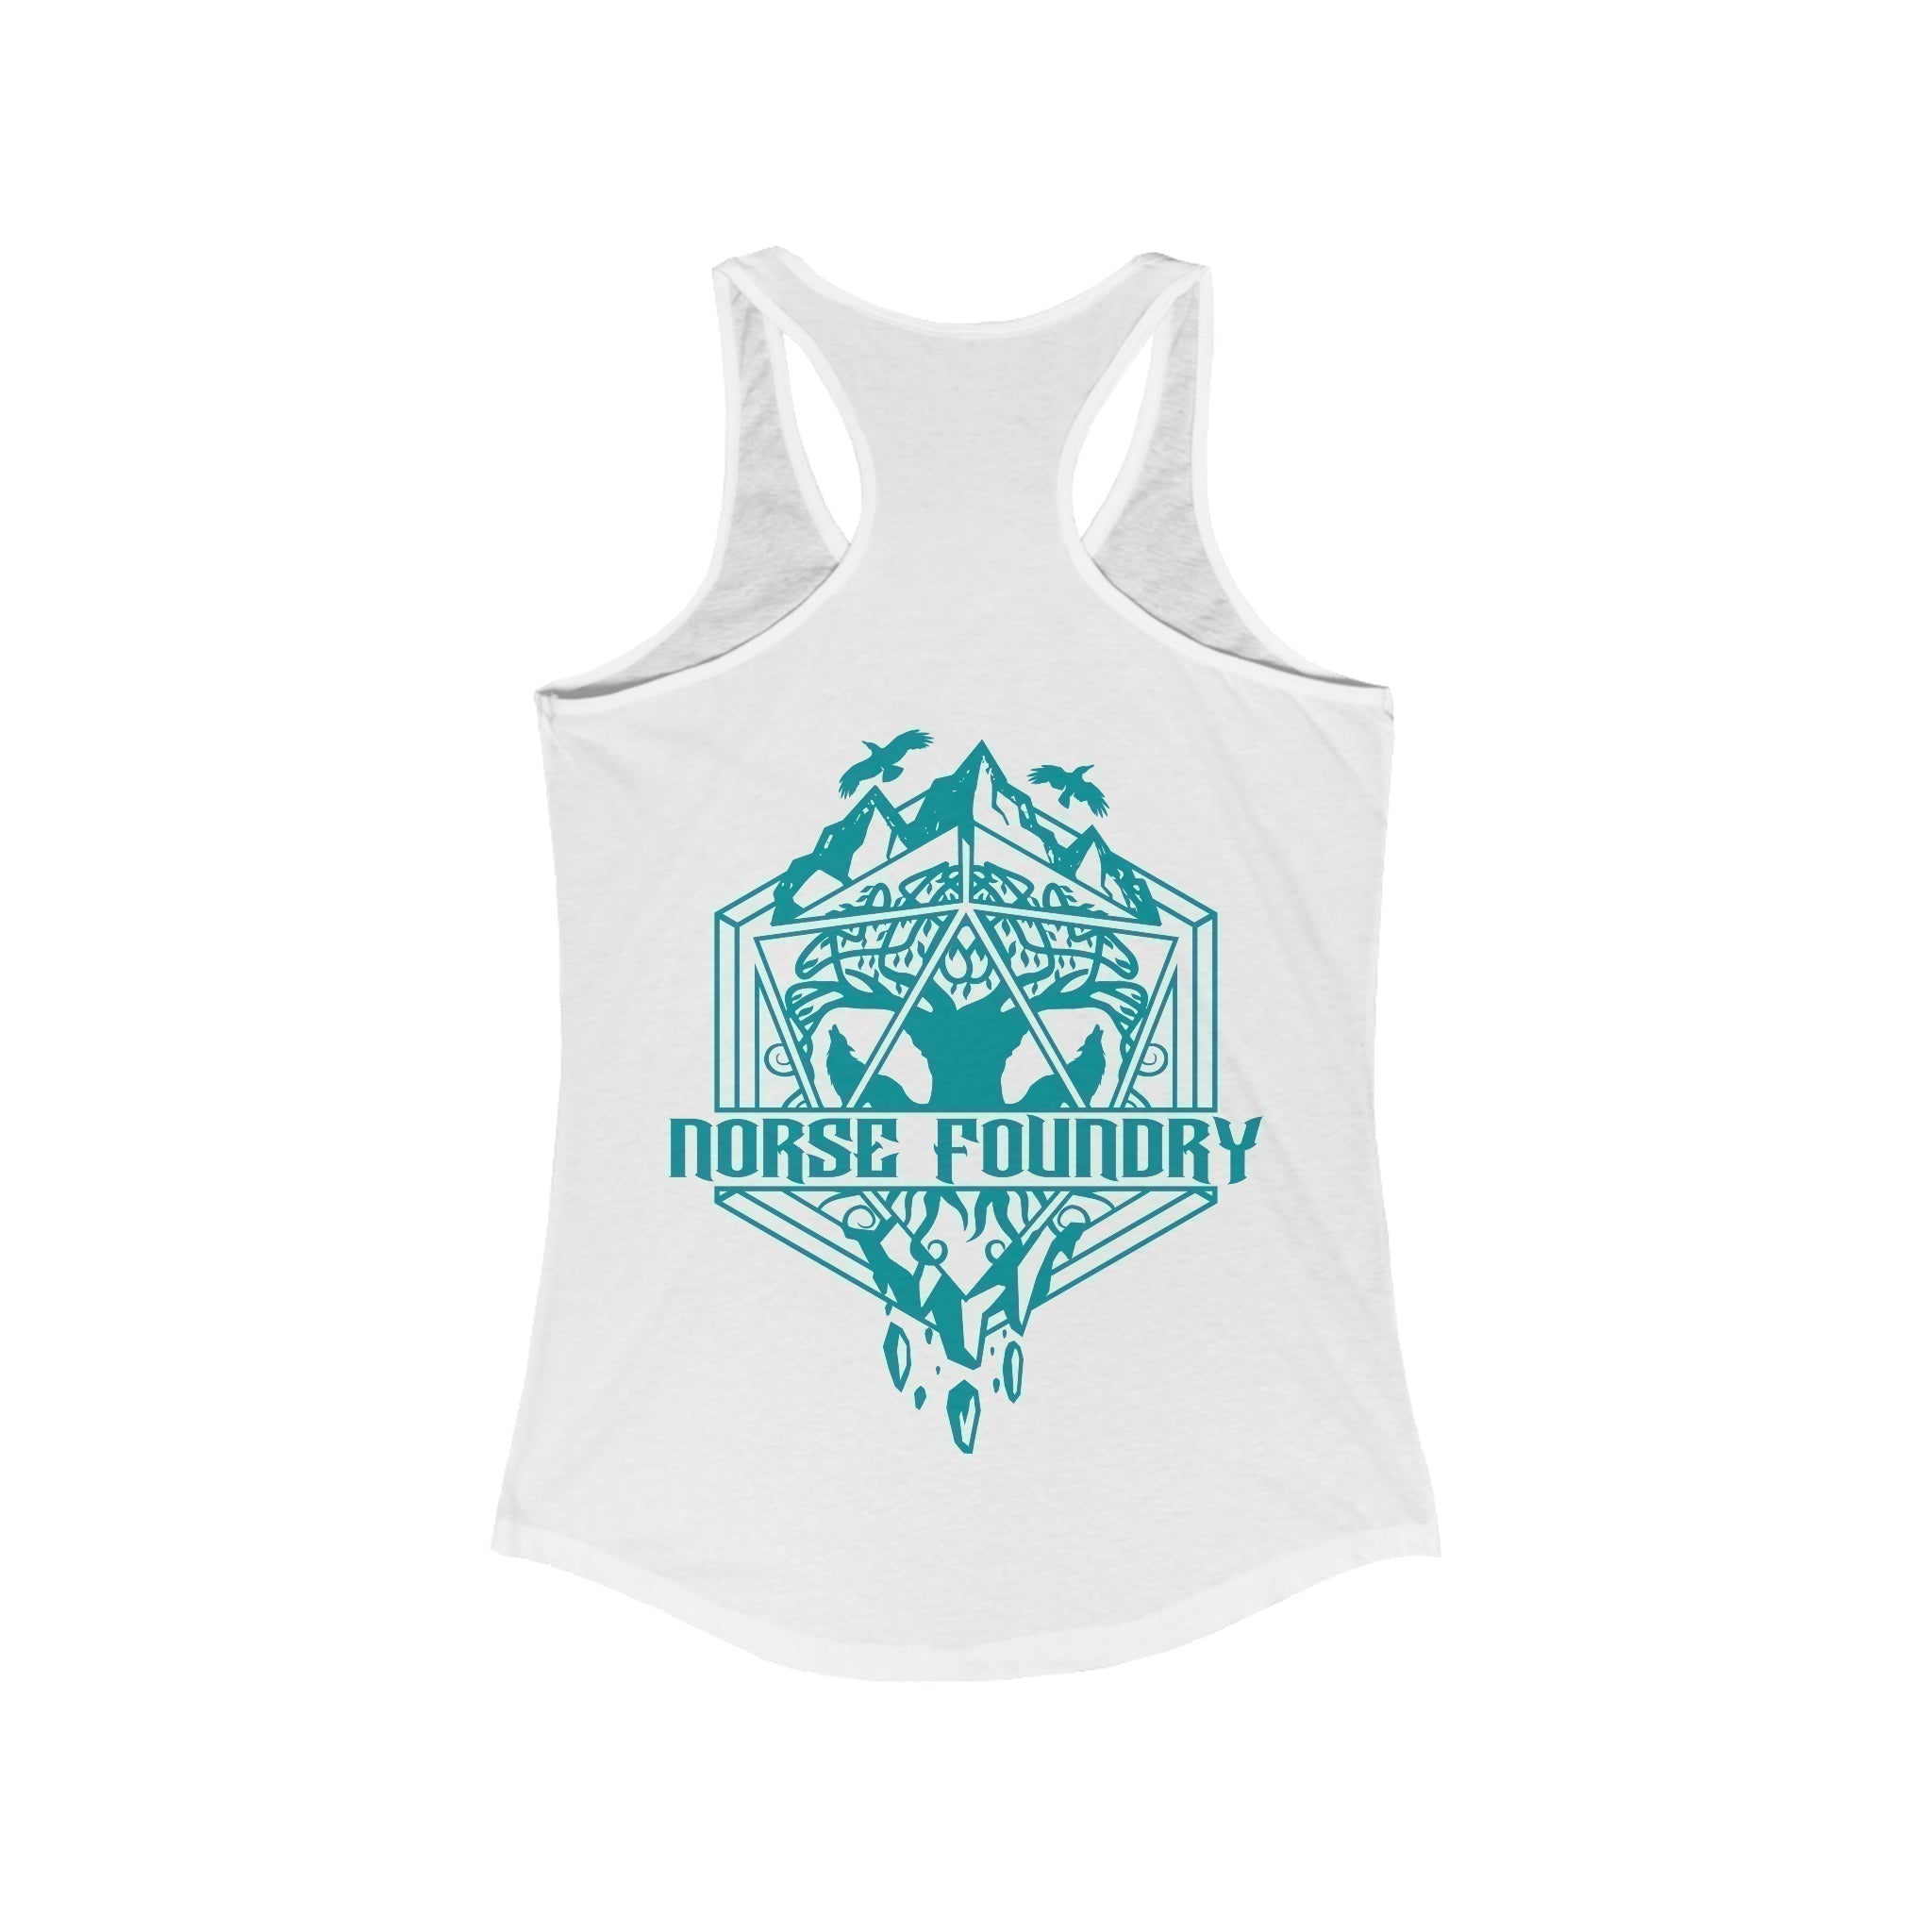 Roll for Adventure - Norse Foundry Women's Tank Top - 19669635553404840206_Parent